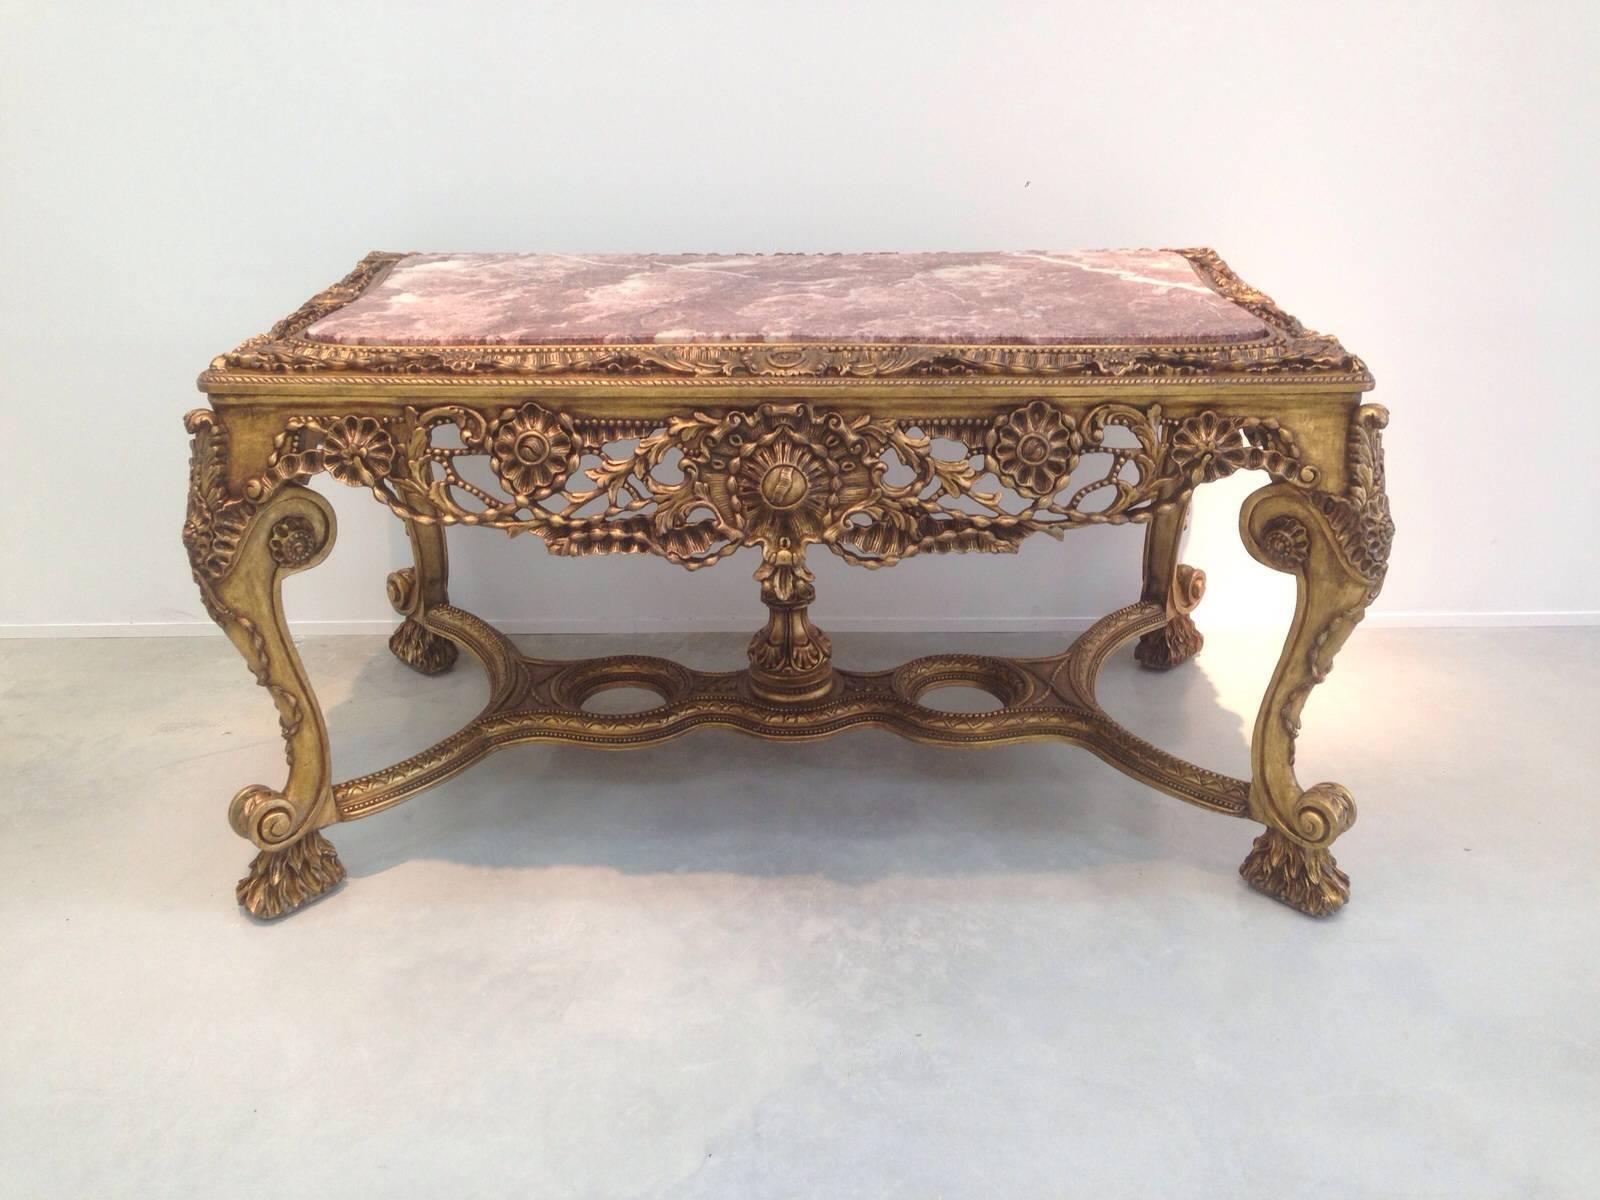 The table has a wonderful contrast between the brilliant gold carvings, rizh reddish wood finish, and pink stone.